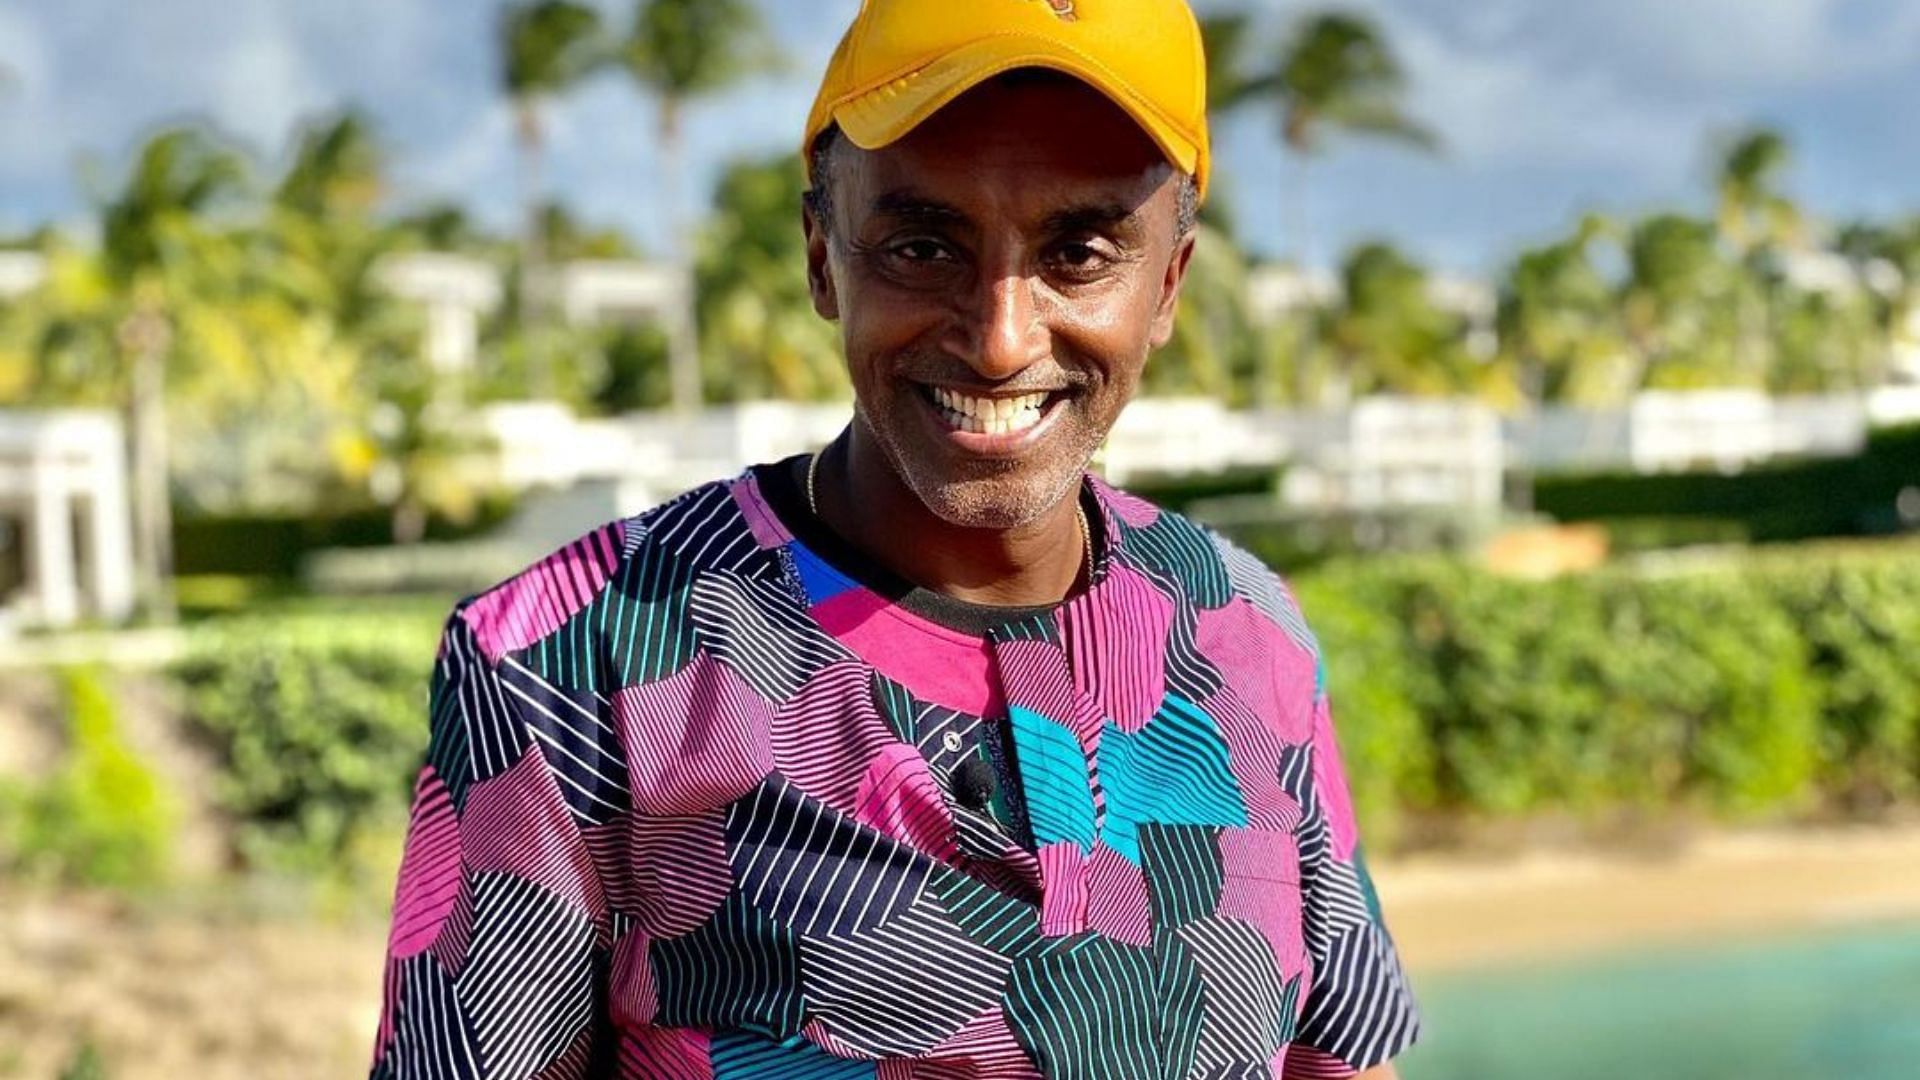 Marcus Samuelsson to join Iron Chef airing on June 15 (Image via marcuscooks/Instagram)